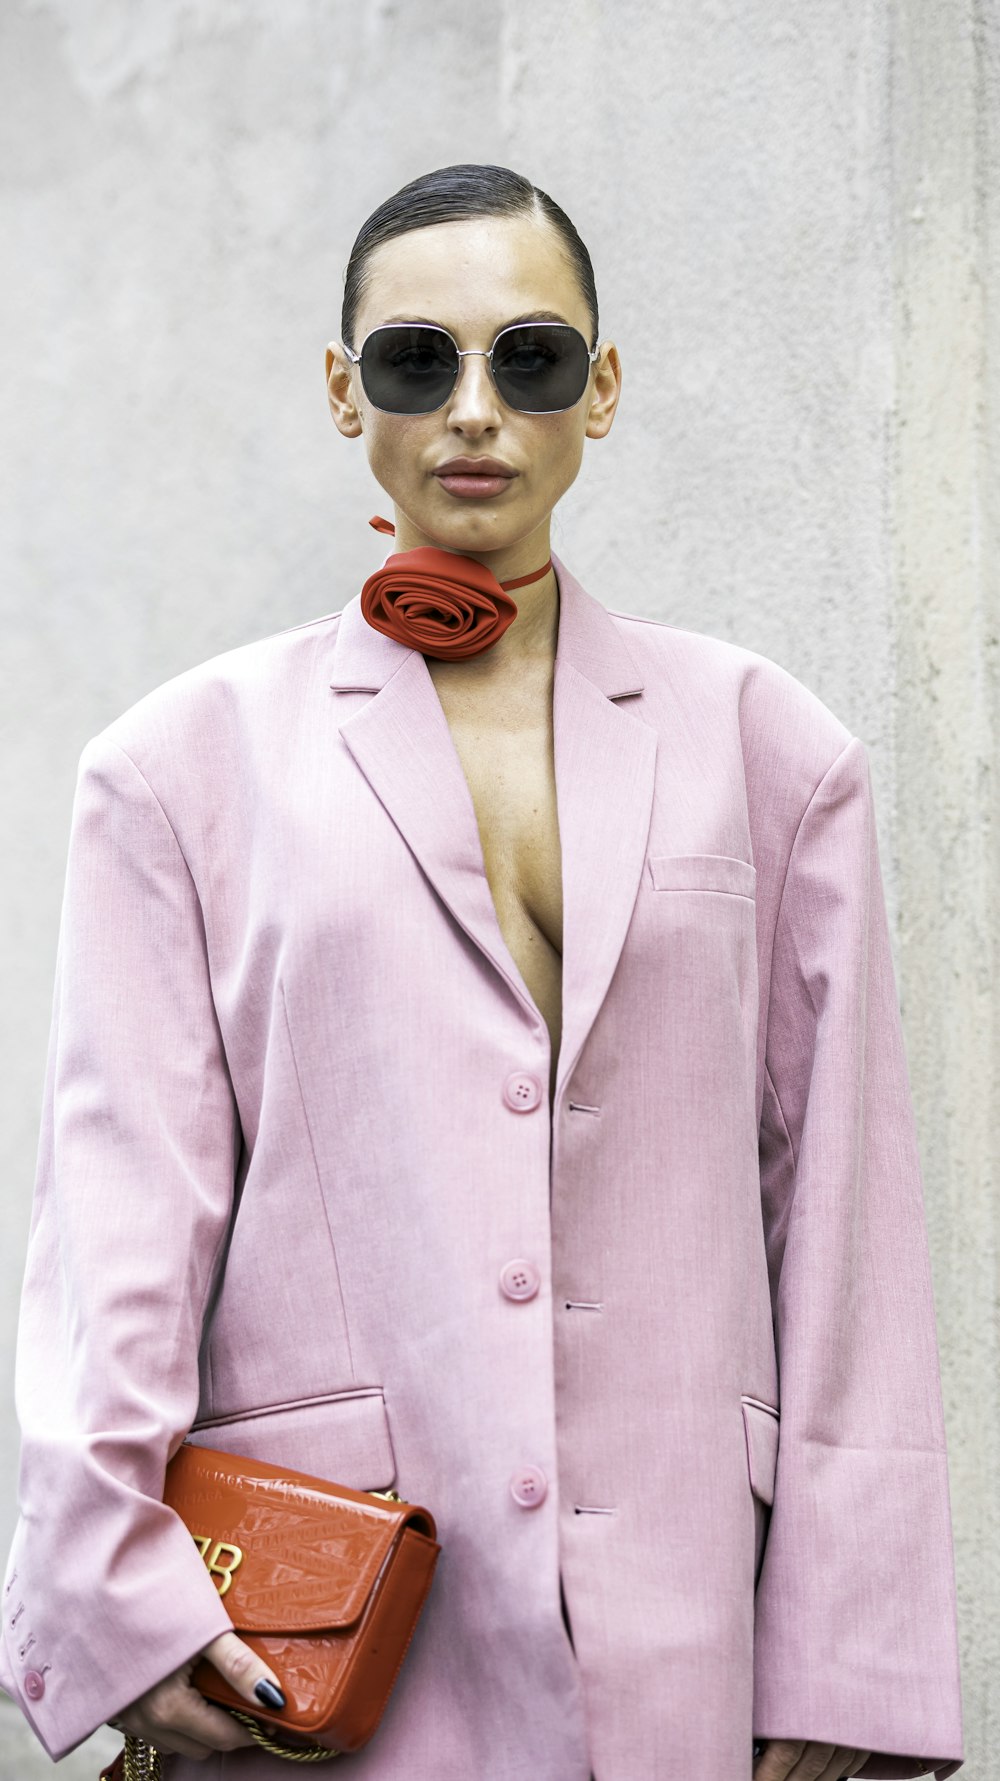 a woman wearing a pink suit and sunglasses